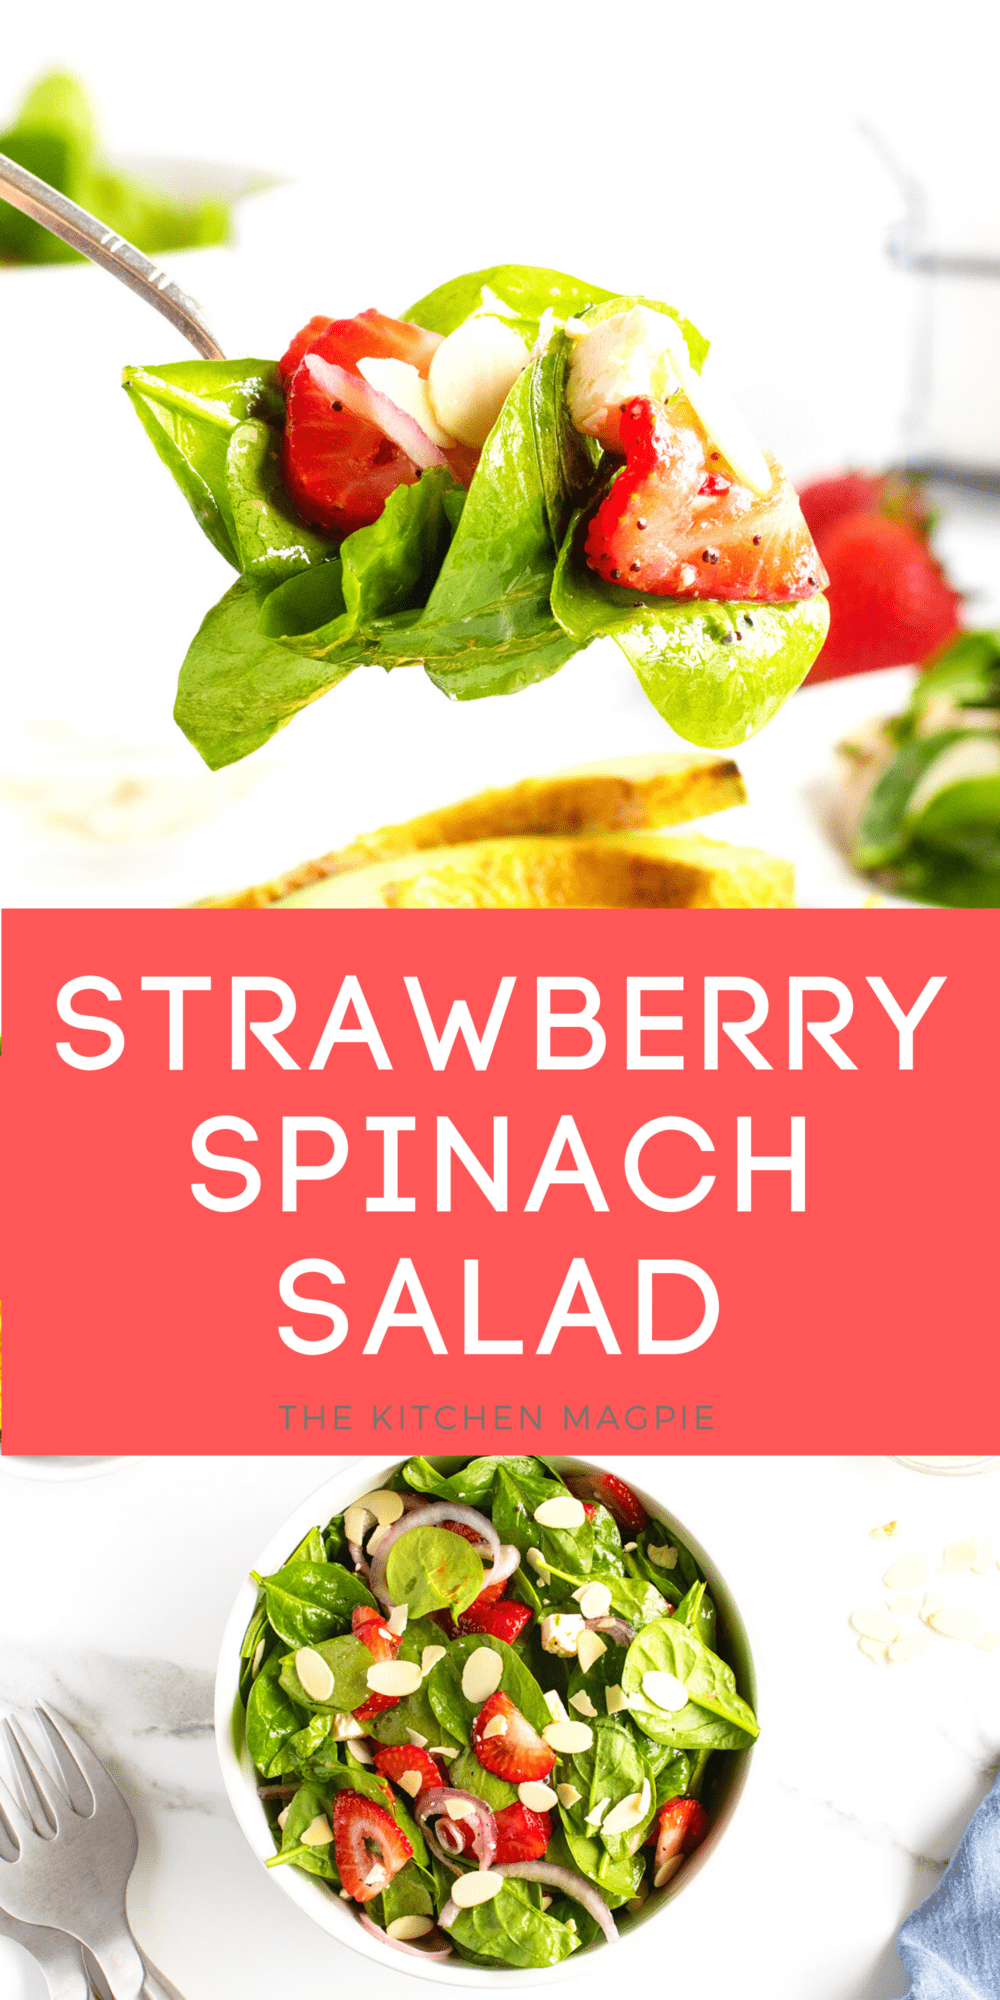 Nothing says summer like a bright strawberry and spinach salad. The crunch of the leaves mixed with the freshness of the fruit come together to create the perfect lunch on a hot summer's day.